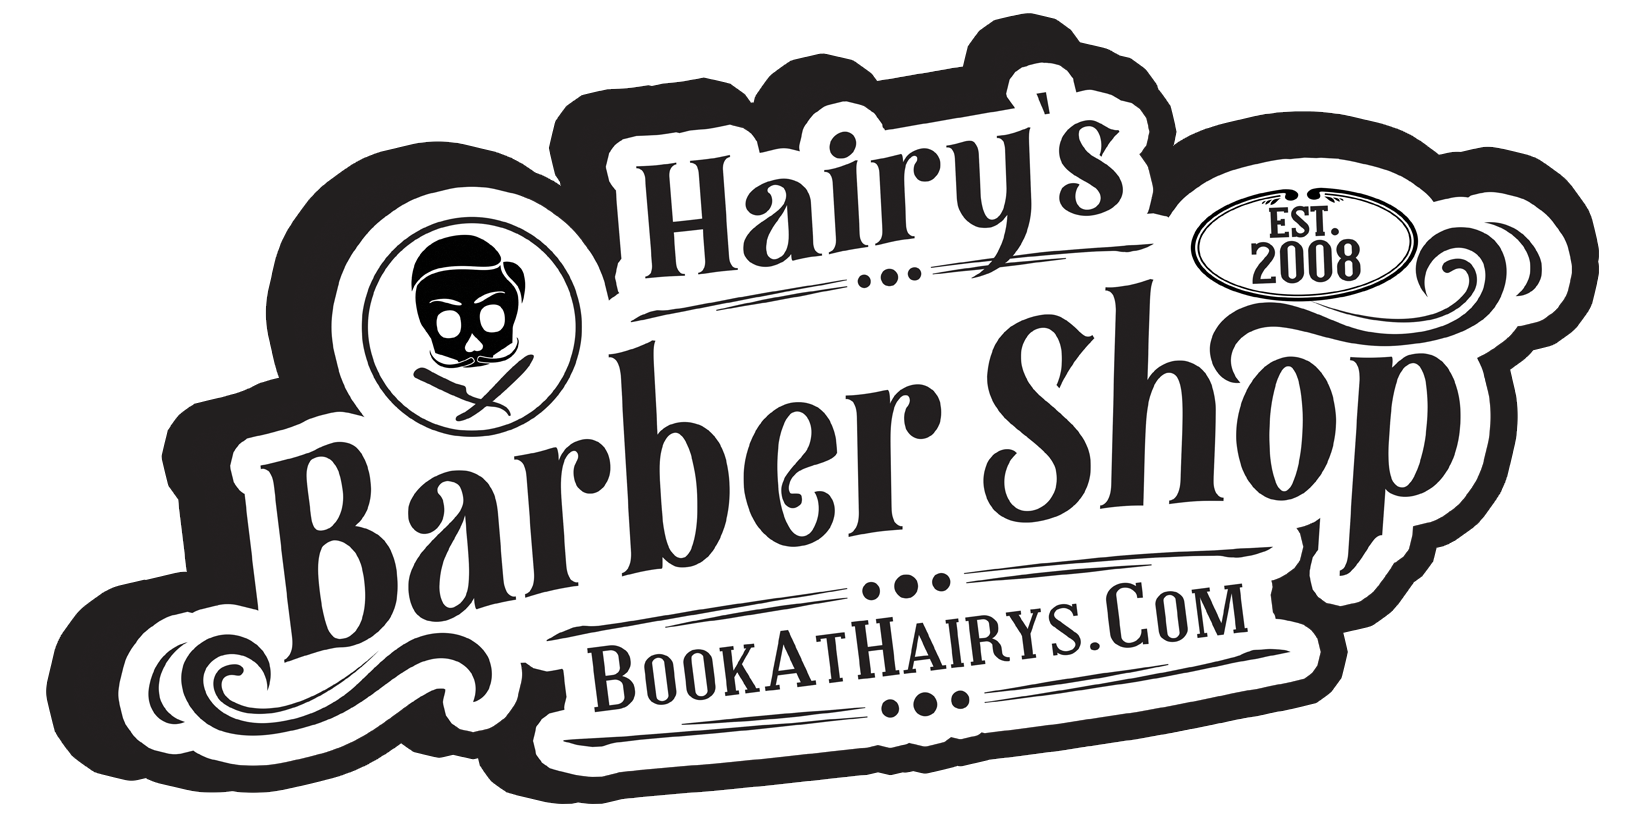 Hairy's Barber Shop